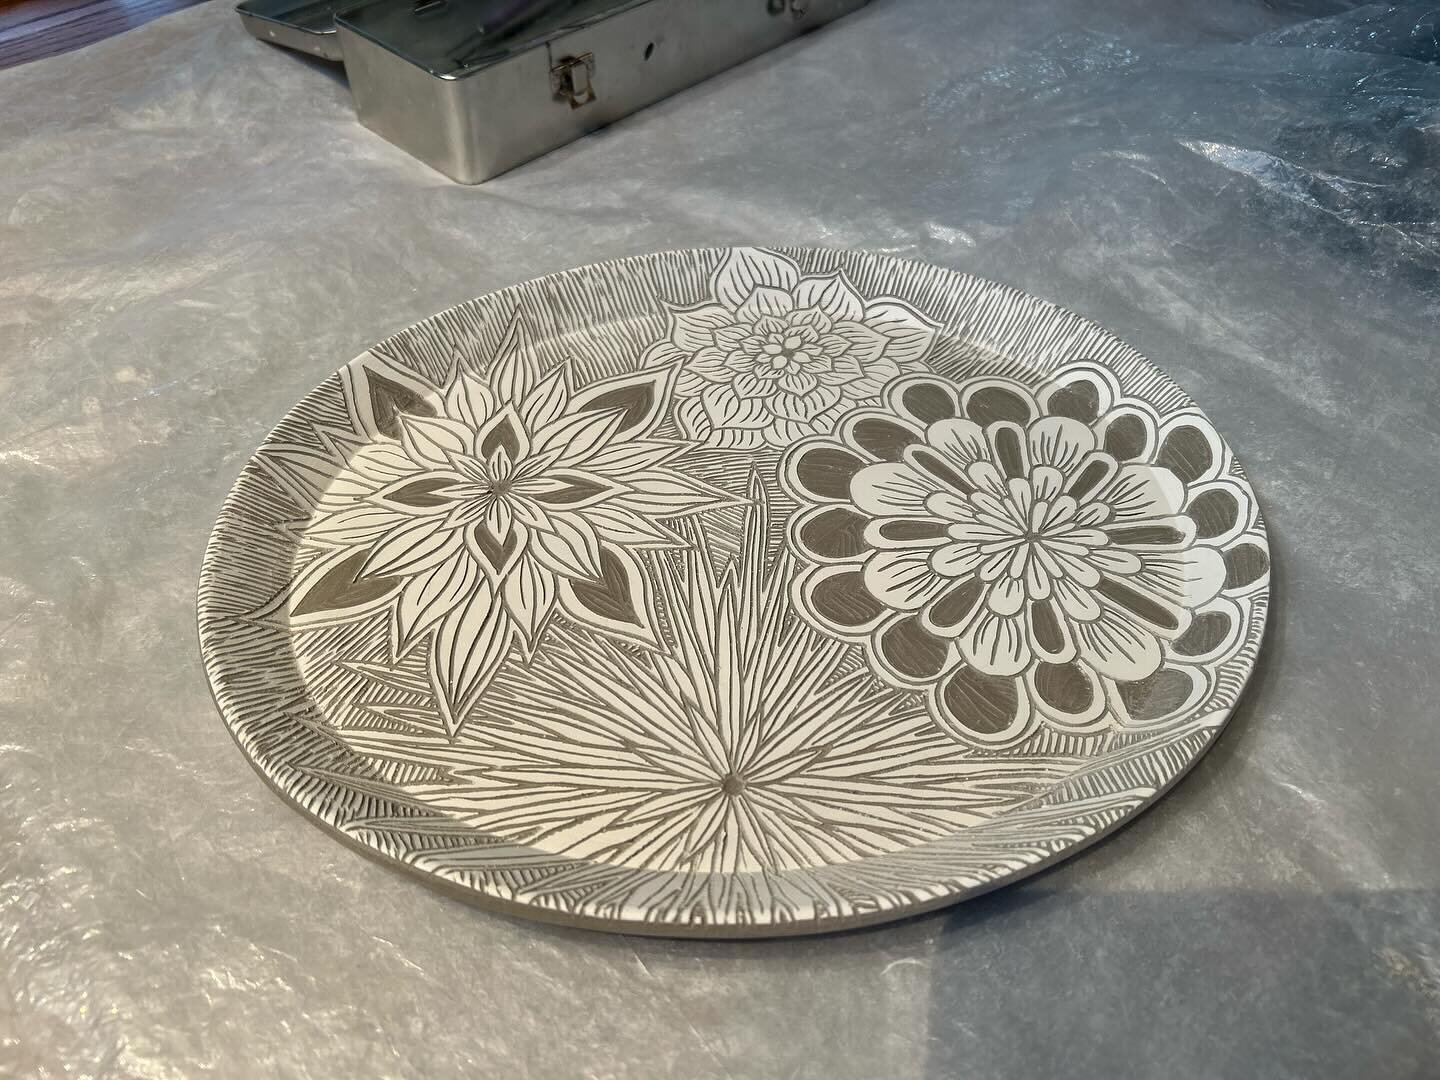 When this is done it will be white on cream and kind of lace like. I love how the color of this clay changes so much. 

#wip #sgraffito #sgraffitopottery #ceramicplatter ##trulysarahceramics #madeinthegorge #howiamaco #grpotteryforms